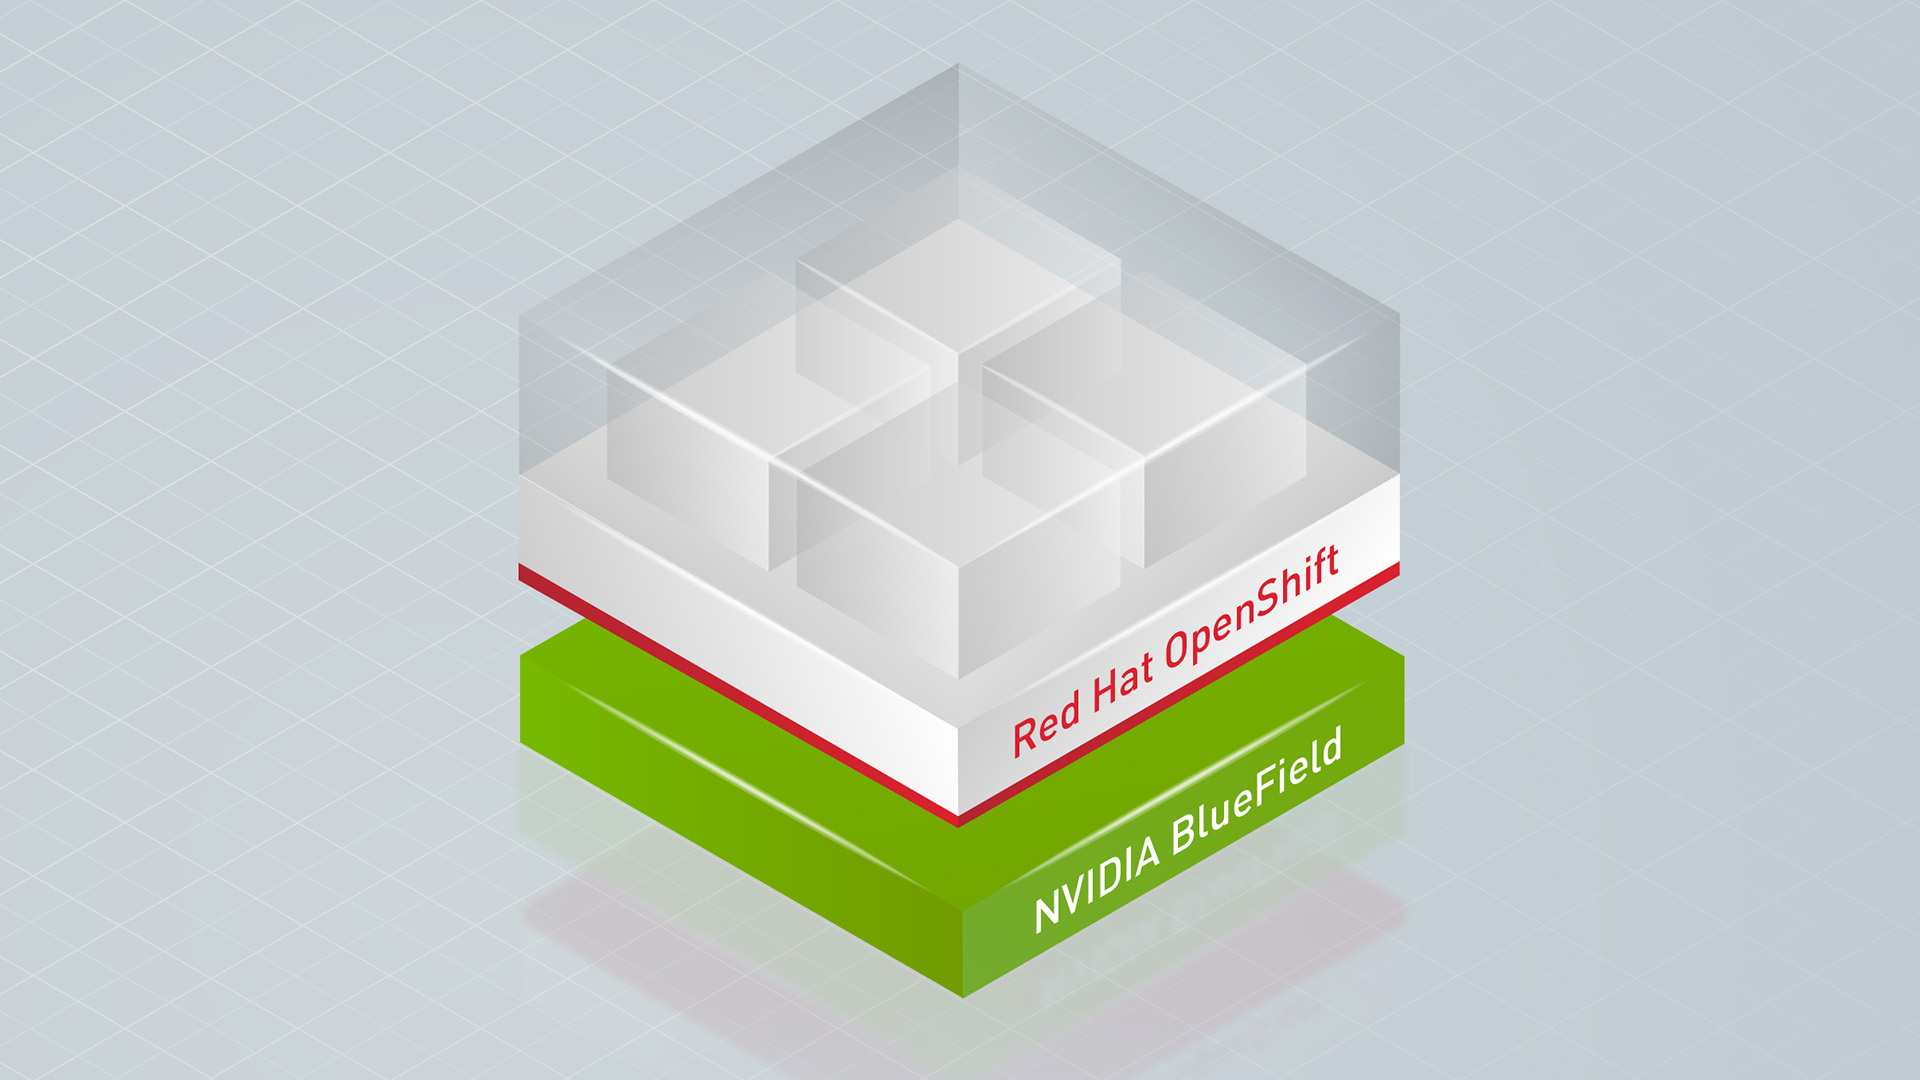 An animated visualization of Red Hat Openshift running on the NVIDIA BlueField DPU